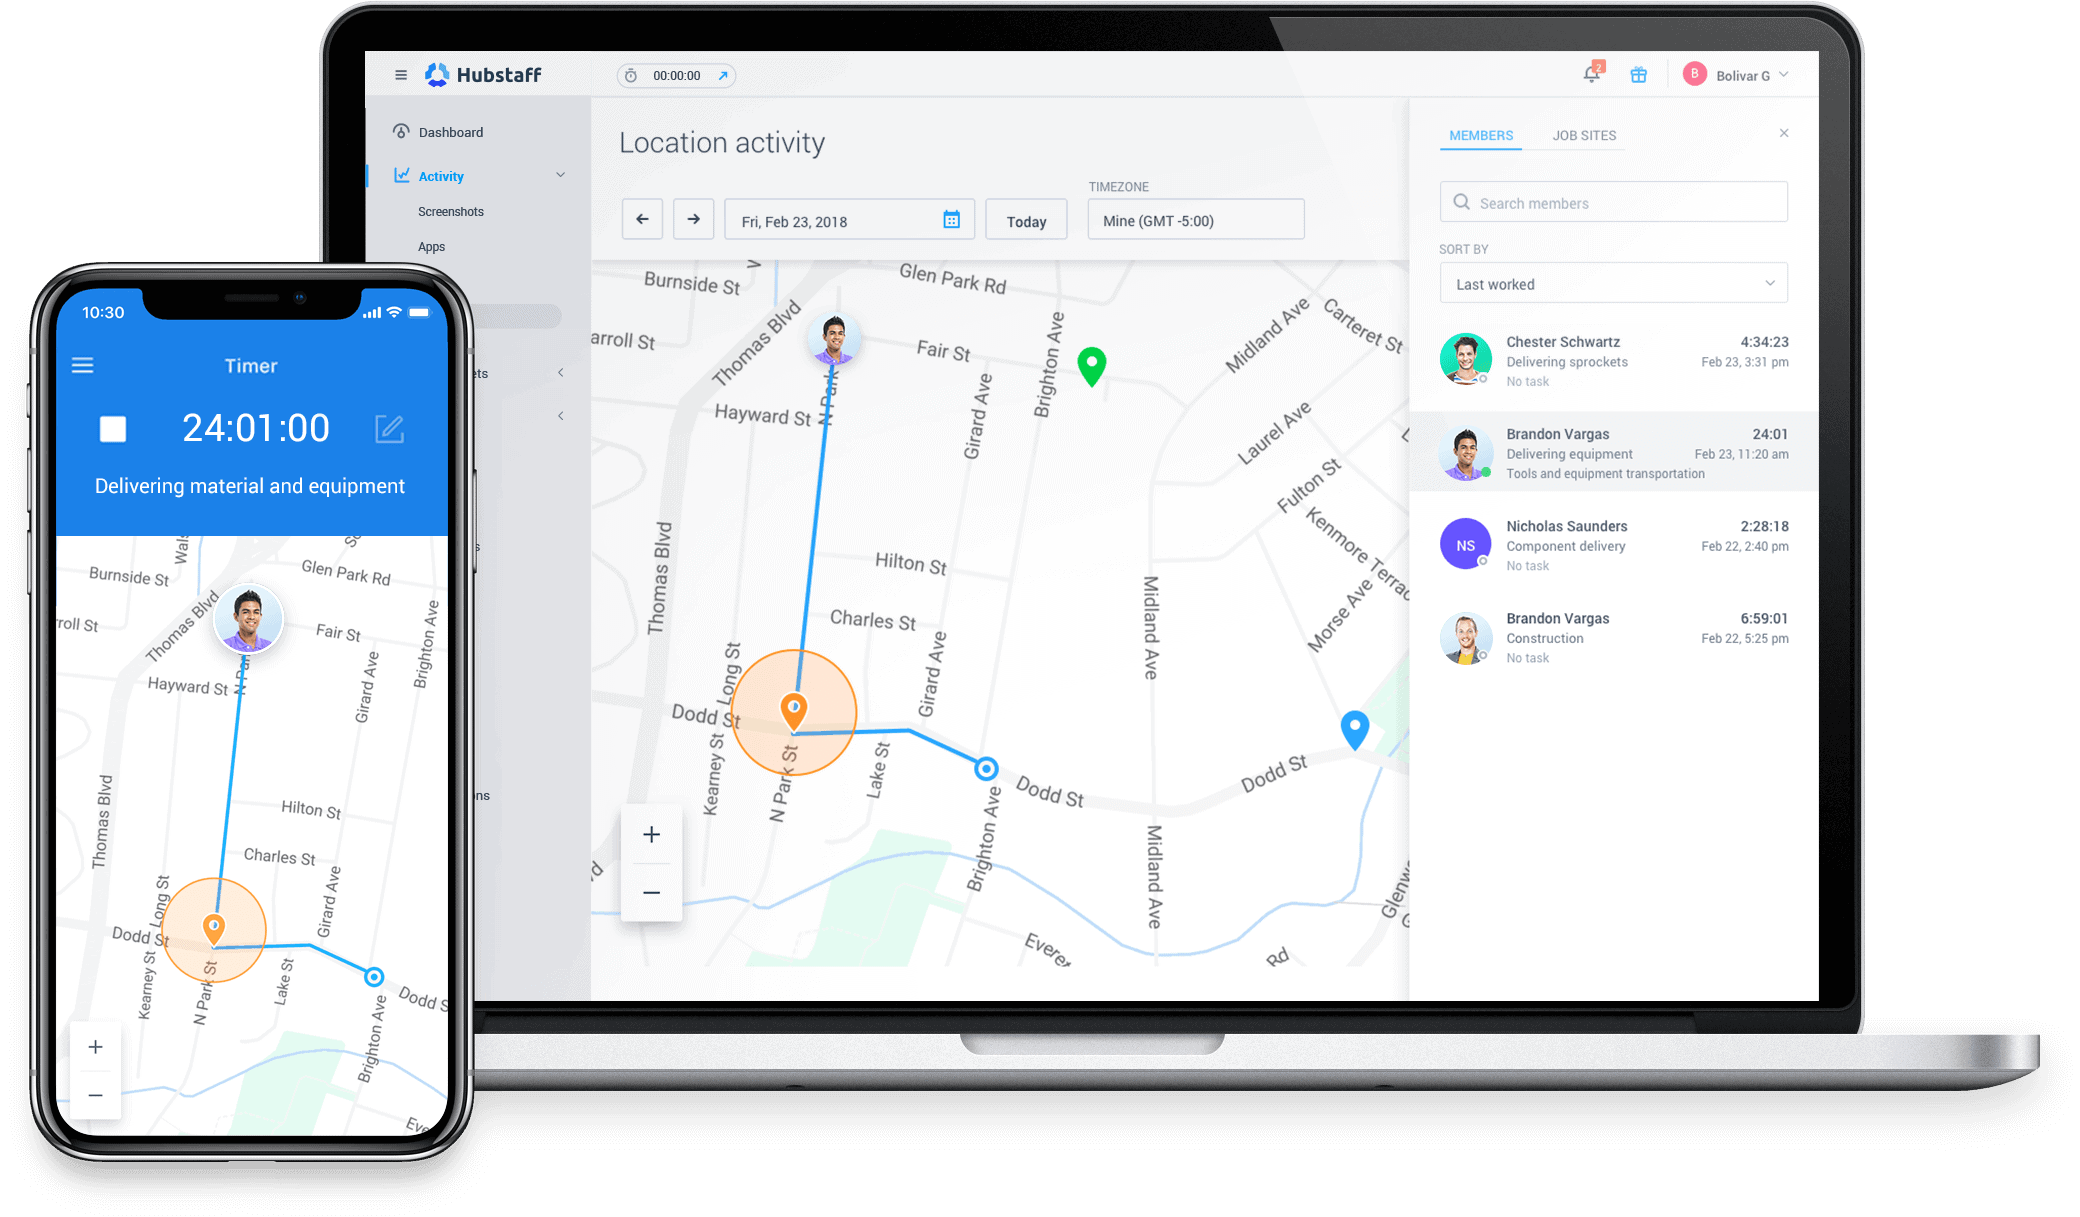 Hubstaff geofencing on mobile devices